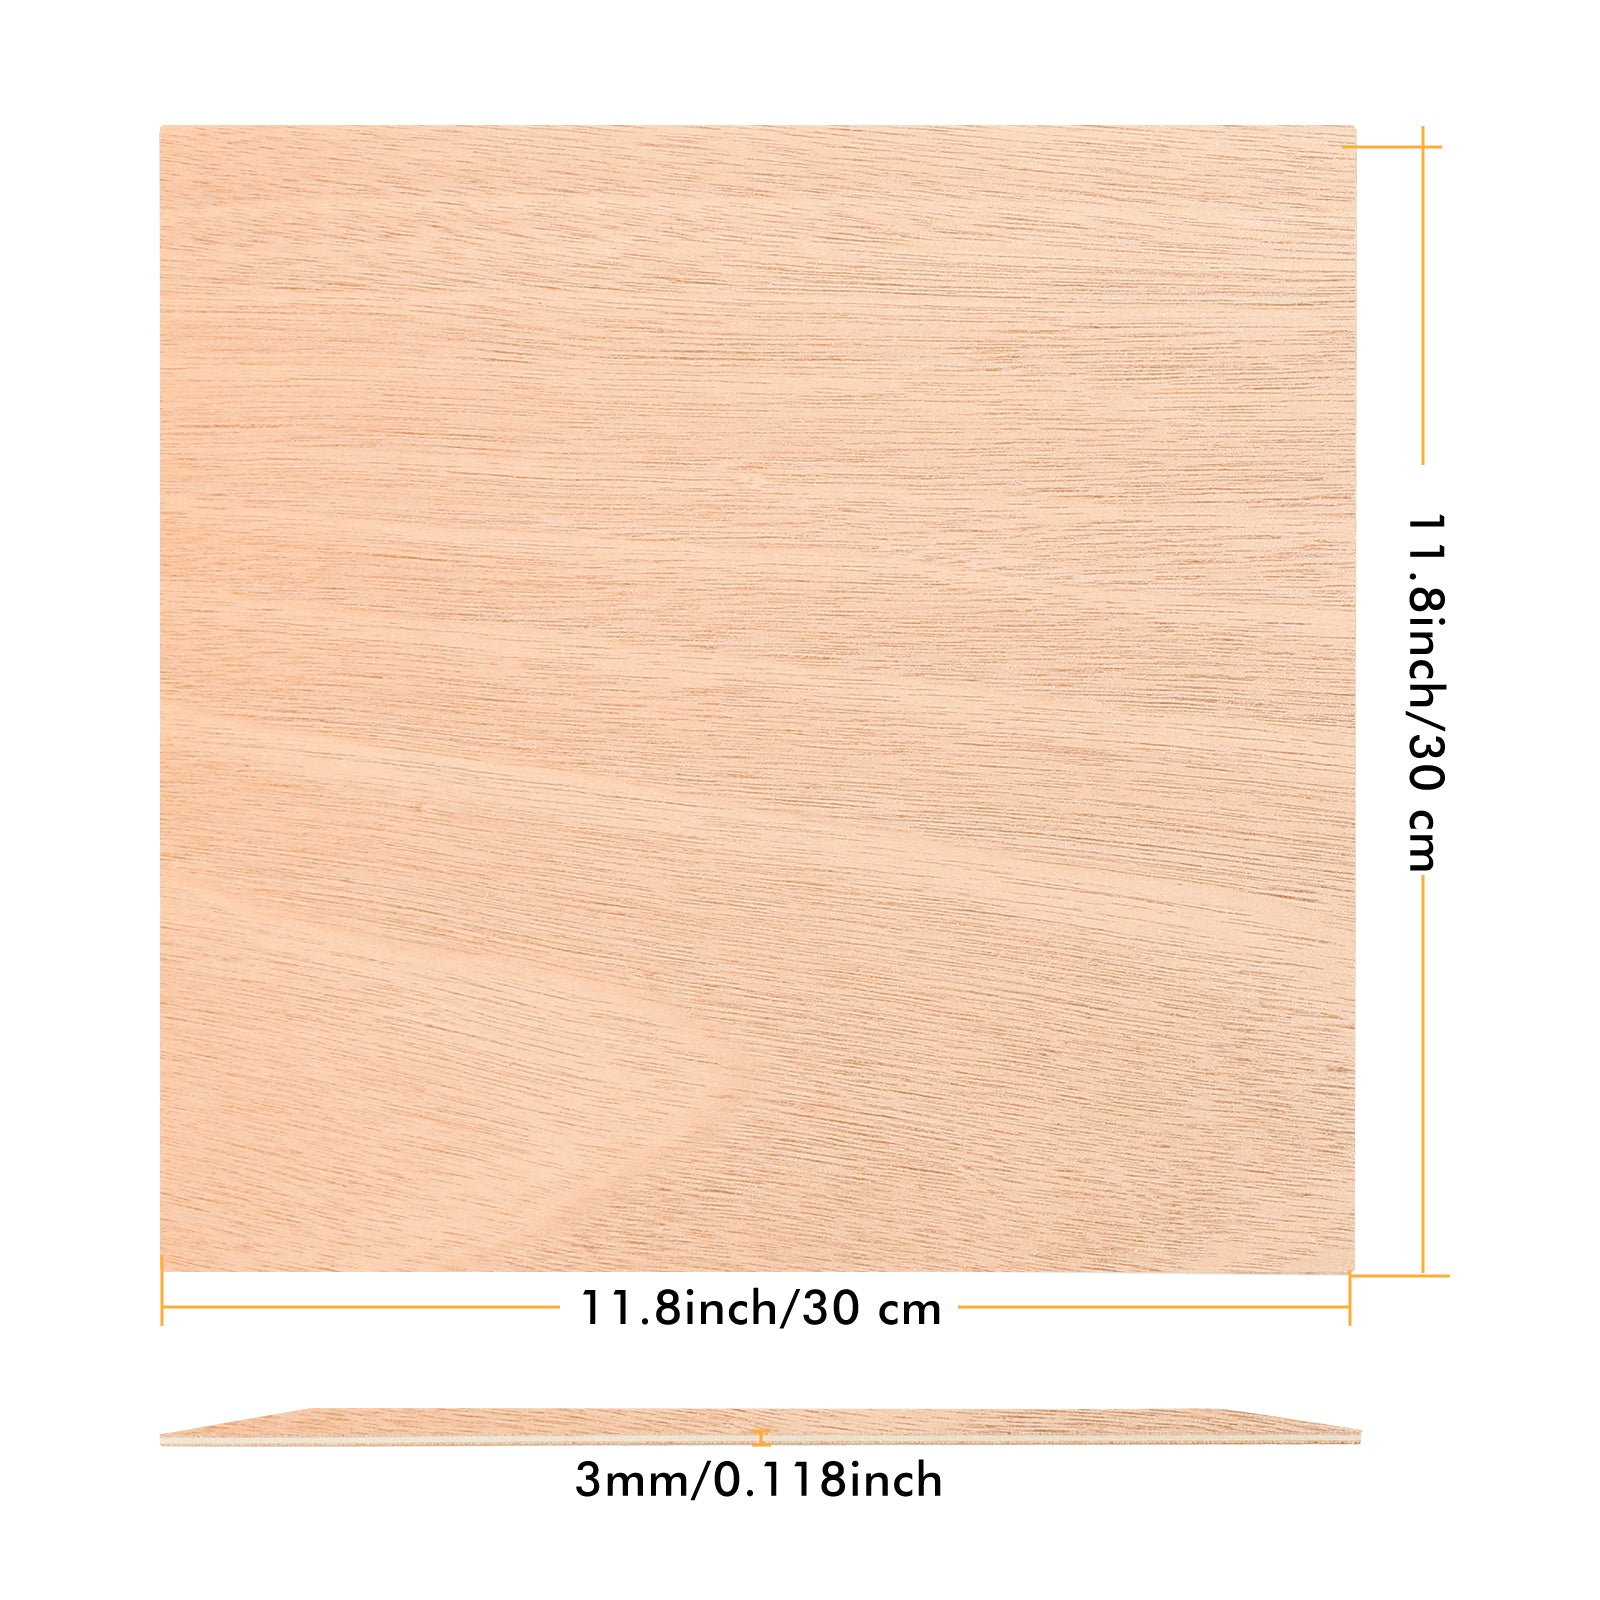 6pcs Mahogany Plywood 12" x 12" Unfinished Wood for Laser Engraving CNC Cutting Crafts Painting - CREATORALLY